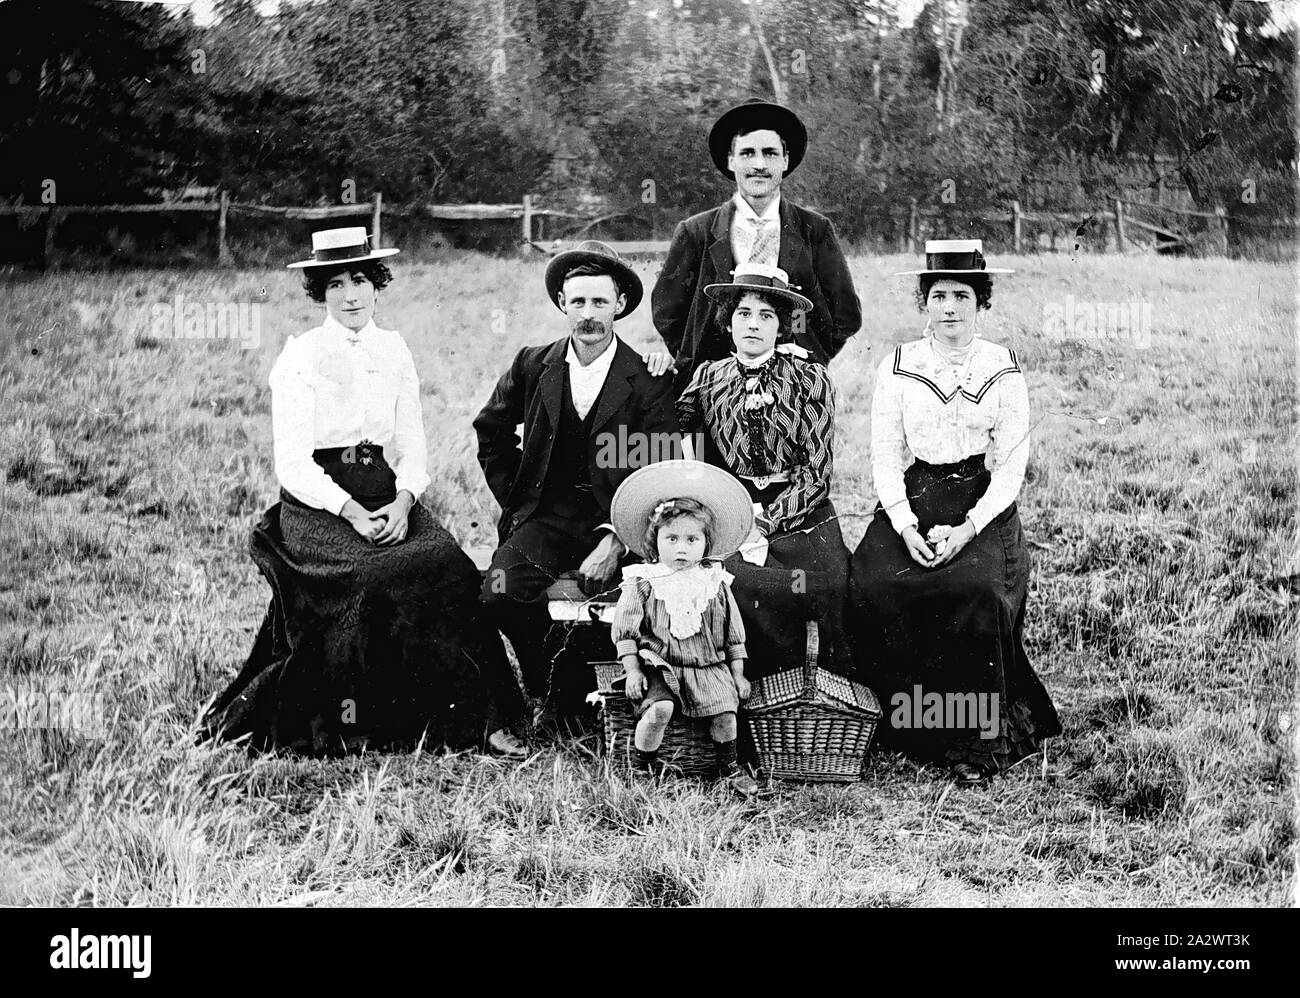 Negative - Picnic, Victoria, circa 1905, Two men, three women and a small child at a picnic in a field. There are two picnic baskets and the child is seated on one of them. There is a strong facial resemblance between the three women - they are, presumably, sisters Stock Photo